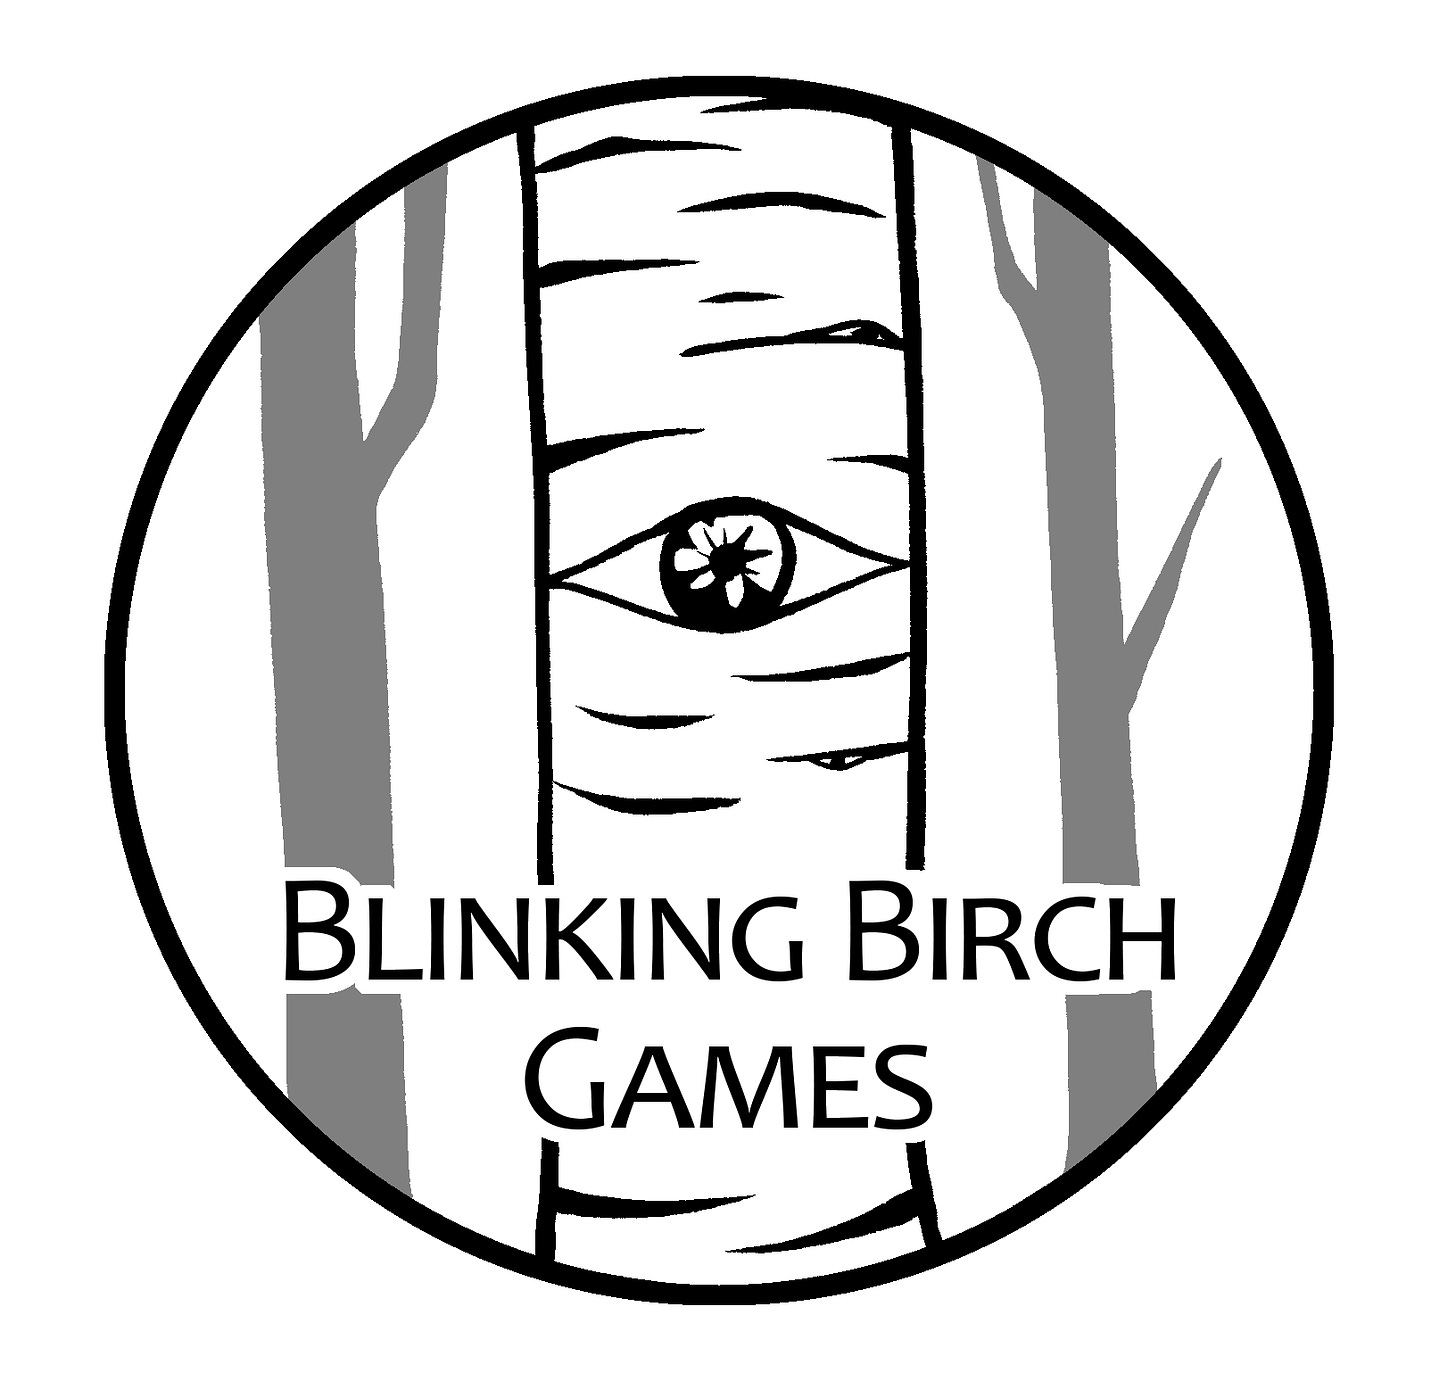 The logo for Blinking Birch Games, which shows a birch tree with an eye open in the center